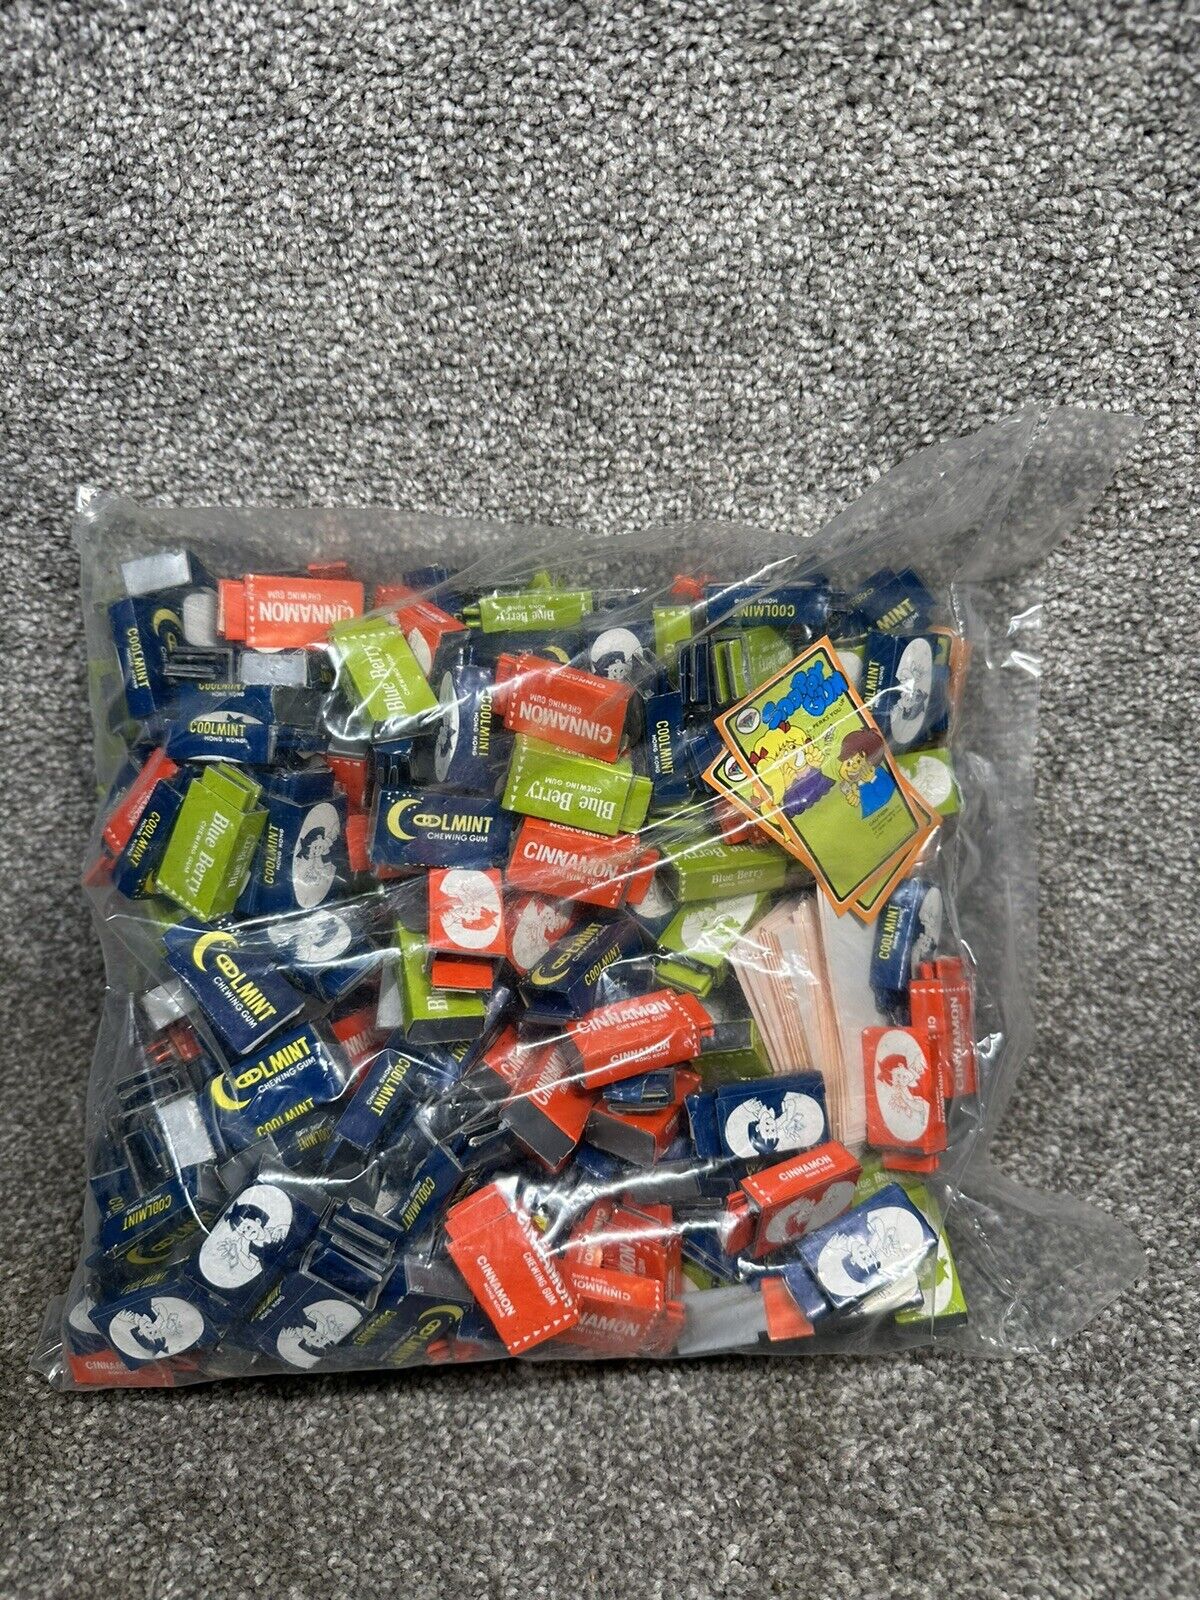 Lot Of 250 Vintage Snappy Gum Cracker Jack Toy Prizes Gumball Machine Prizes NEW